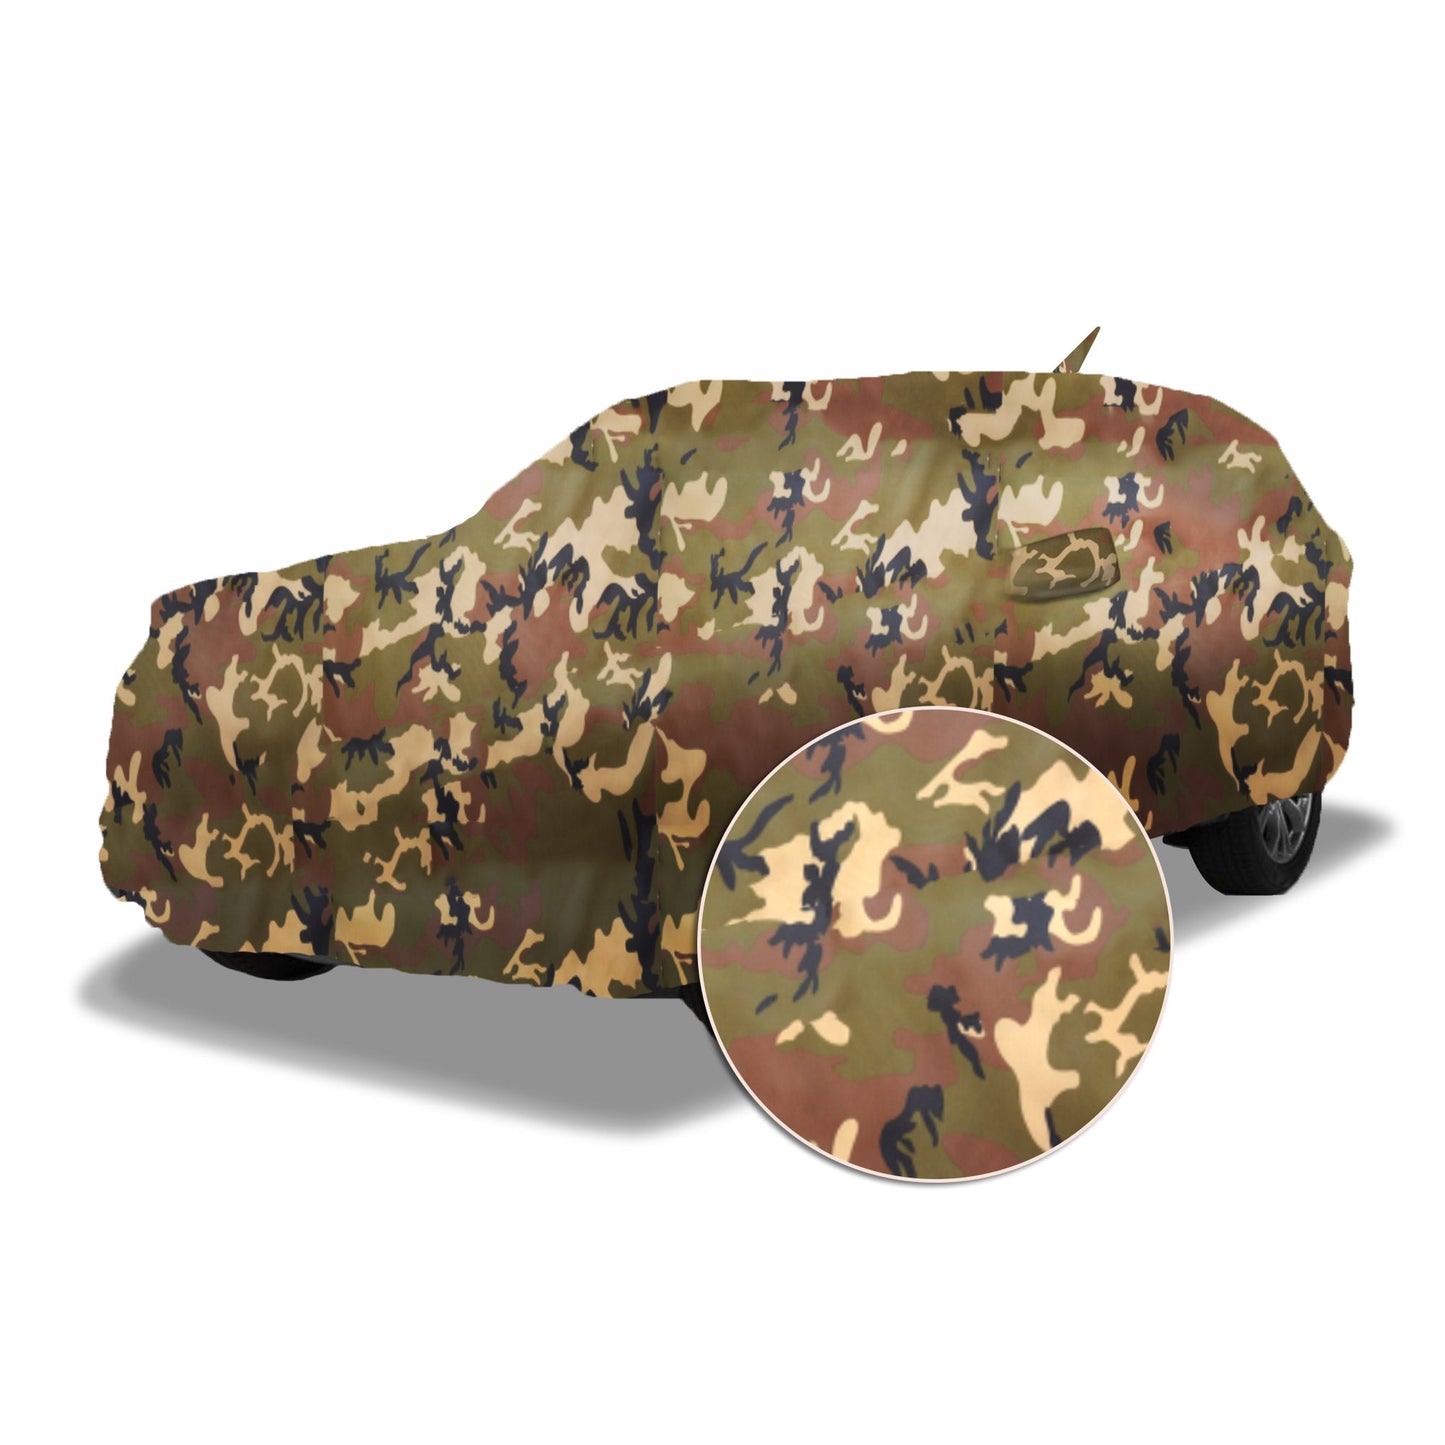 Ascot Tata Hexa Car Body Cover Extra Strong & Dust Proof Jungle Military Car Cover with UV Proof & Water-Resistant Coating